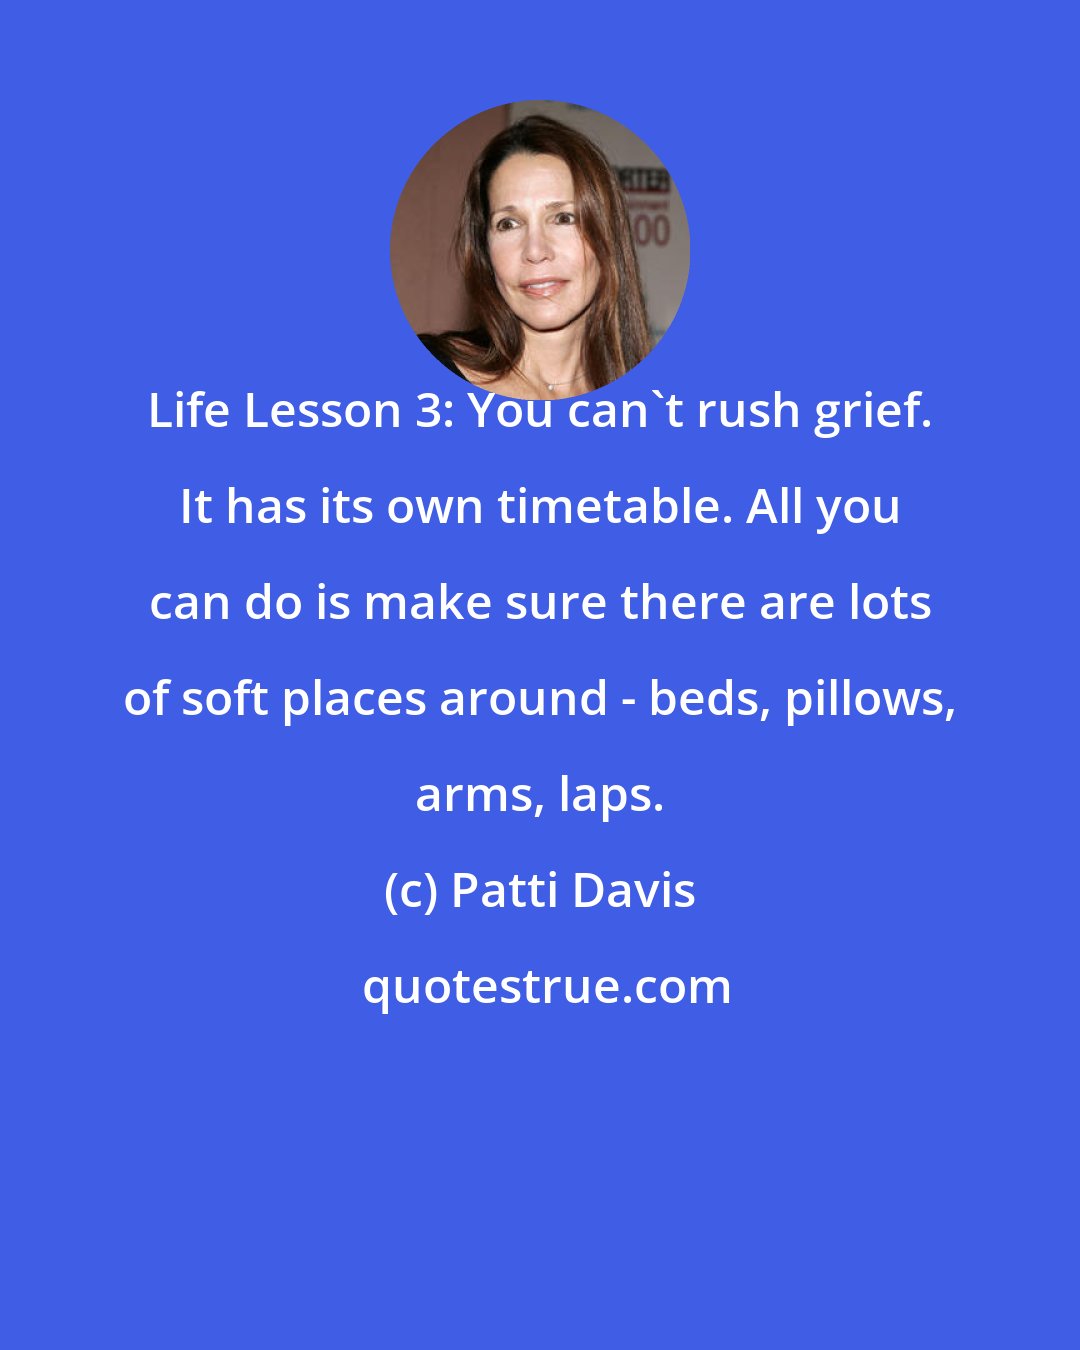 Patti Davis: Life Lesson 3: You can't rush grief. It has its own timetable. All you can do is make sure there are lots of soft places around - beds, pillows, arms, laps.